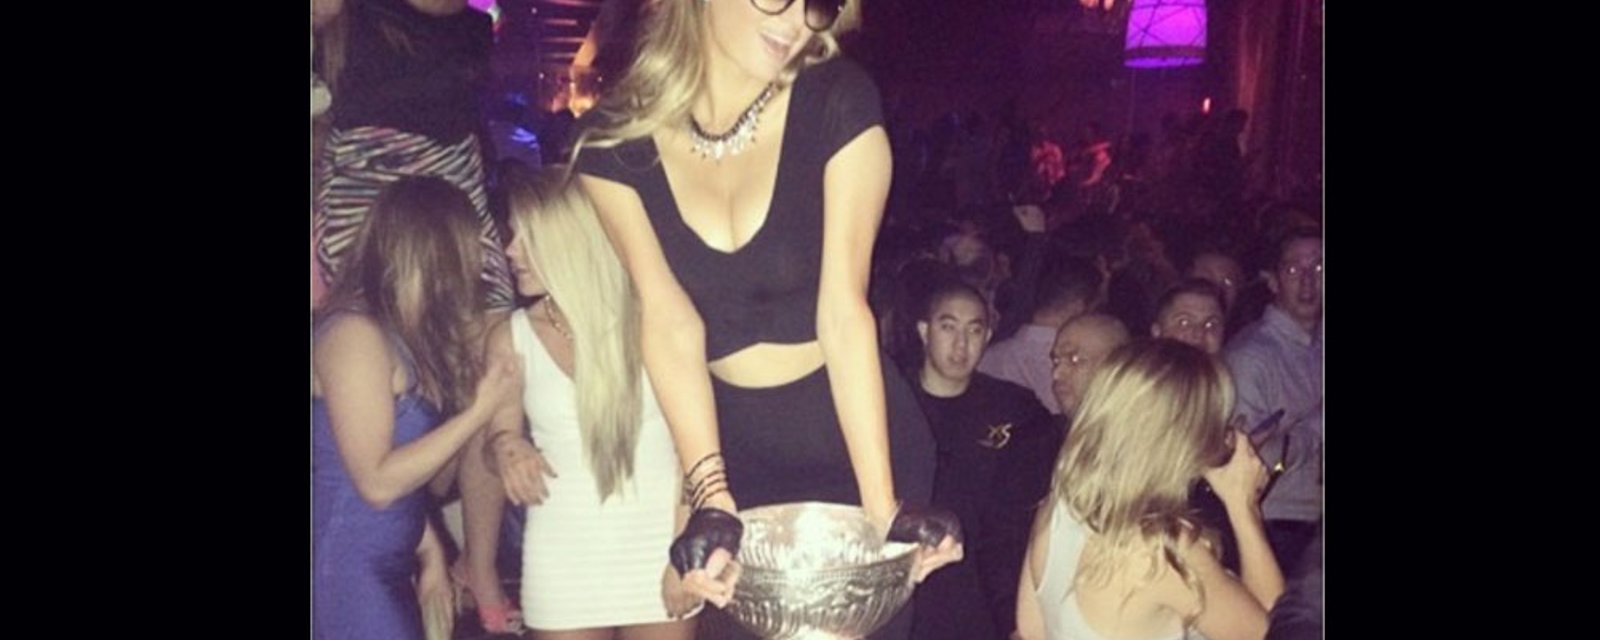 Paris Hilton played hockey in high school and an NHL team wants her on its roster! 